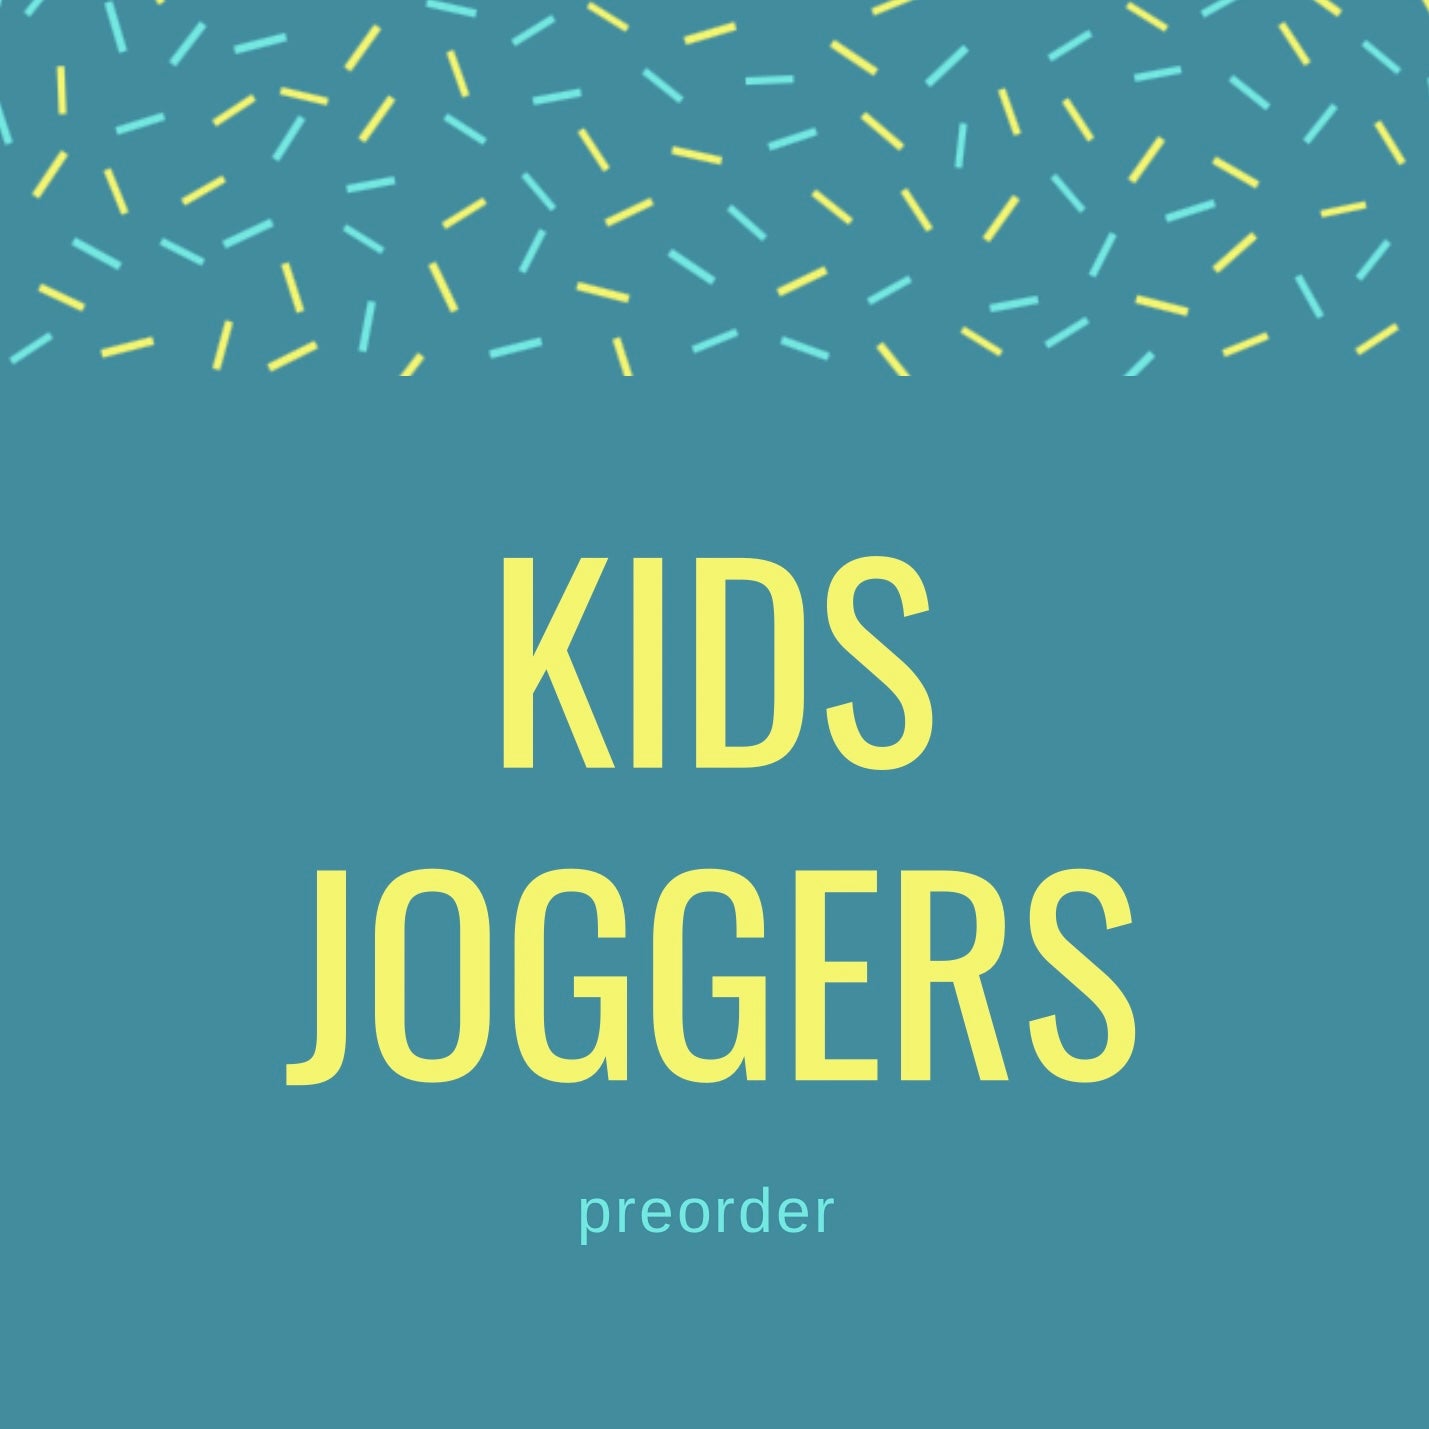 Kids bamboo joggers - preorder